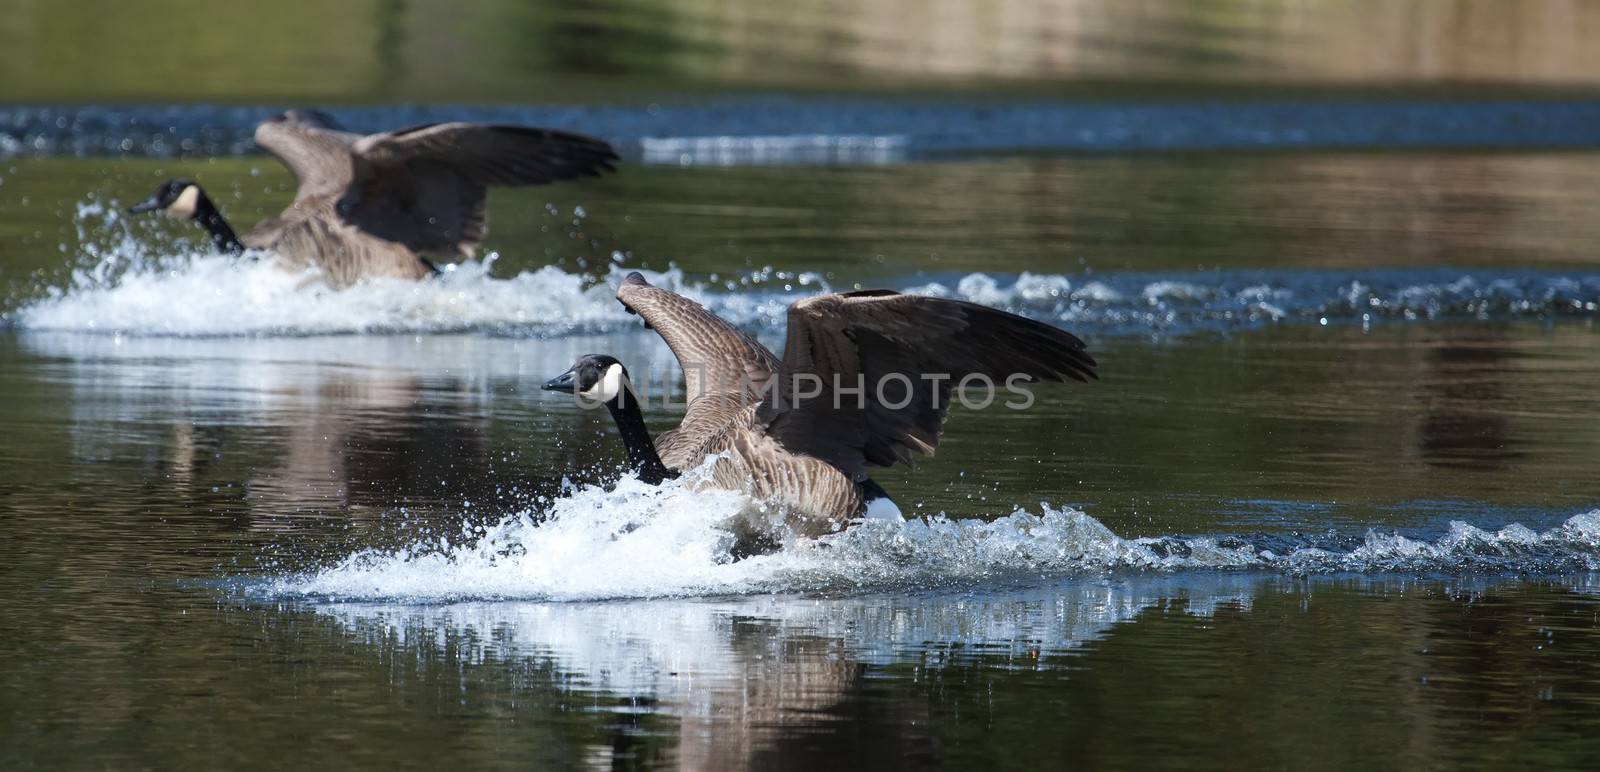 Canadian goose landing on water by Coffee999